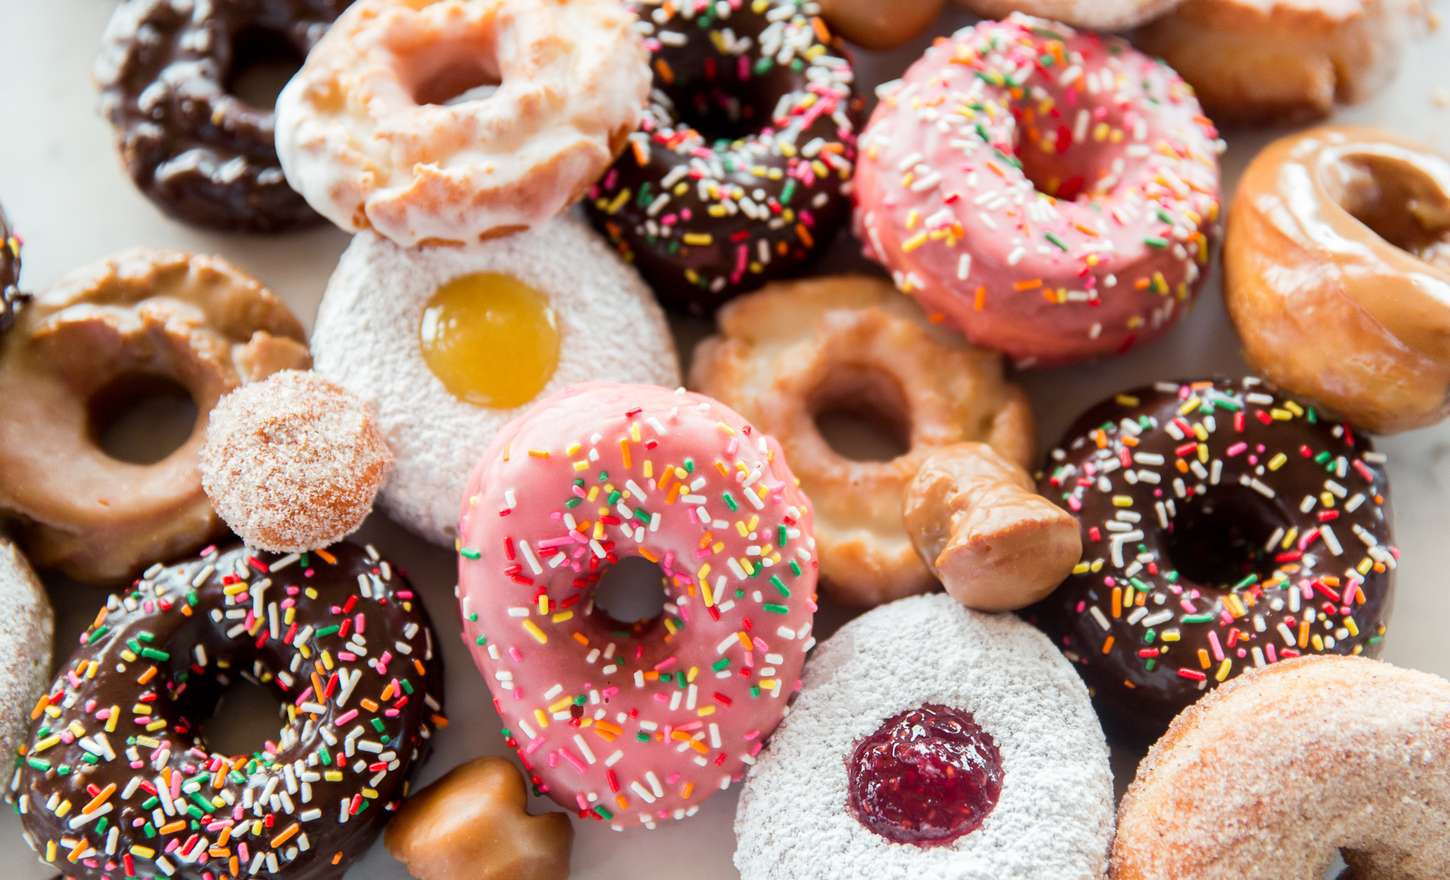 This 🍭 Sugar Overload Quiz Will Reveal What You’re Craving for 🍕 Dinner donuts